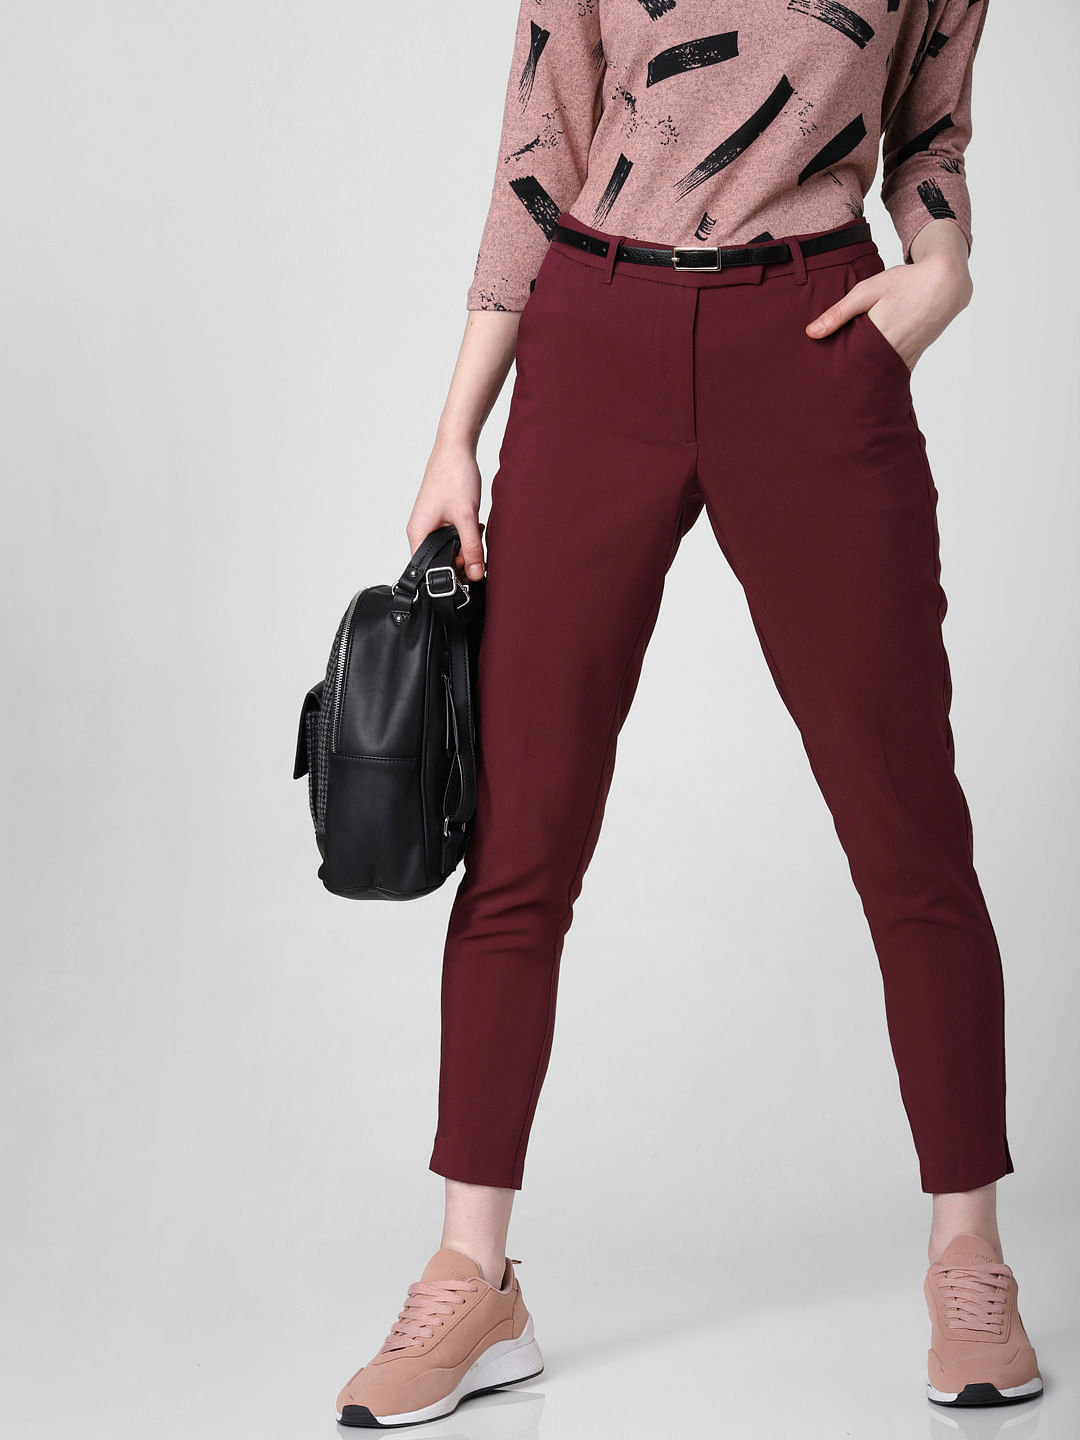 Burgundy Skinny Trousers  Trousers  PrettyLittleThing